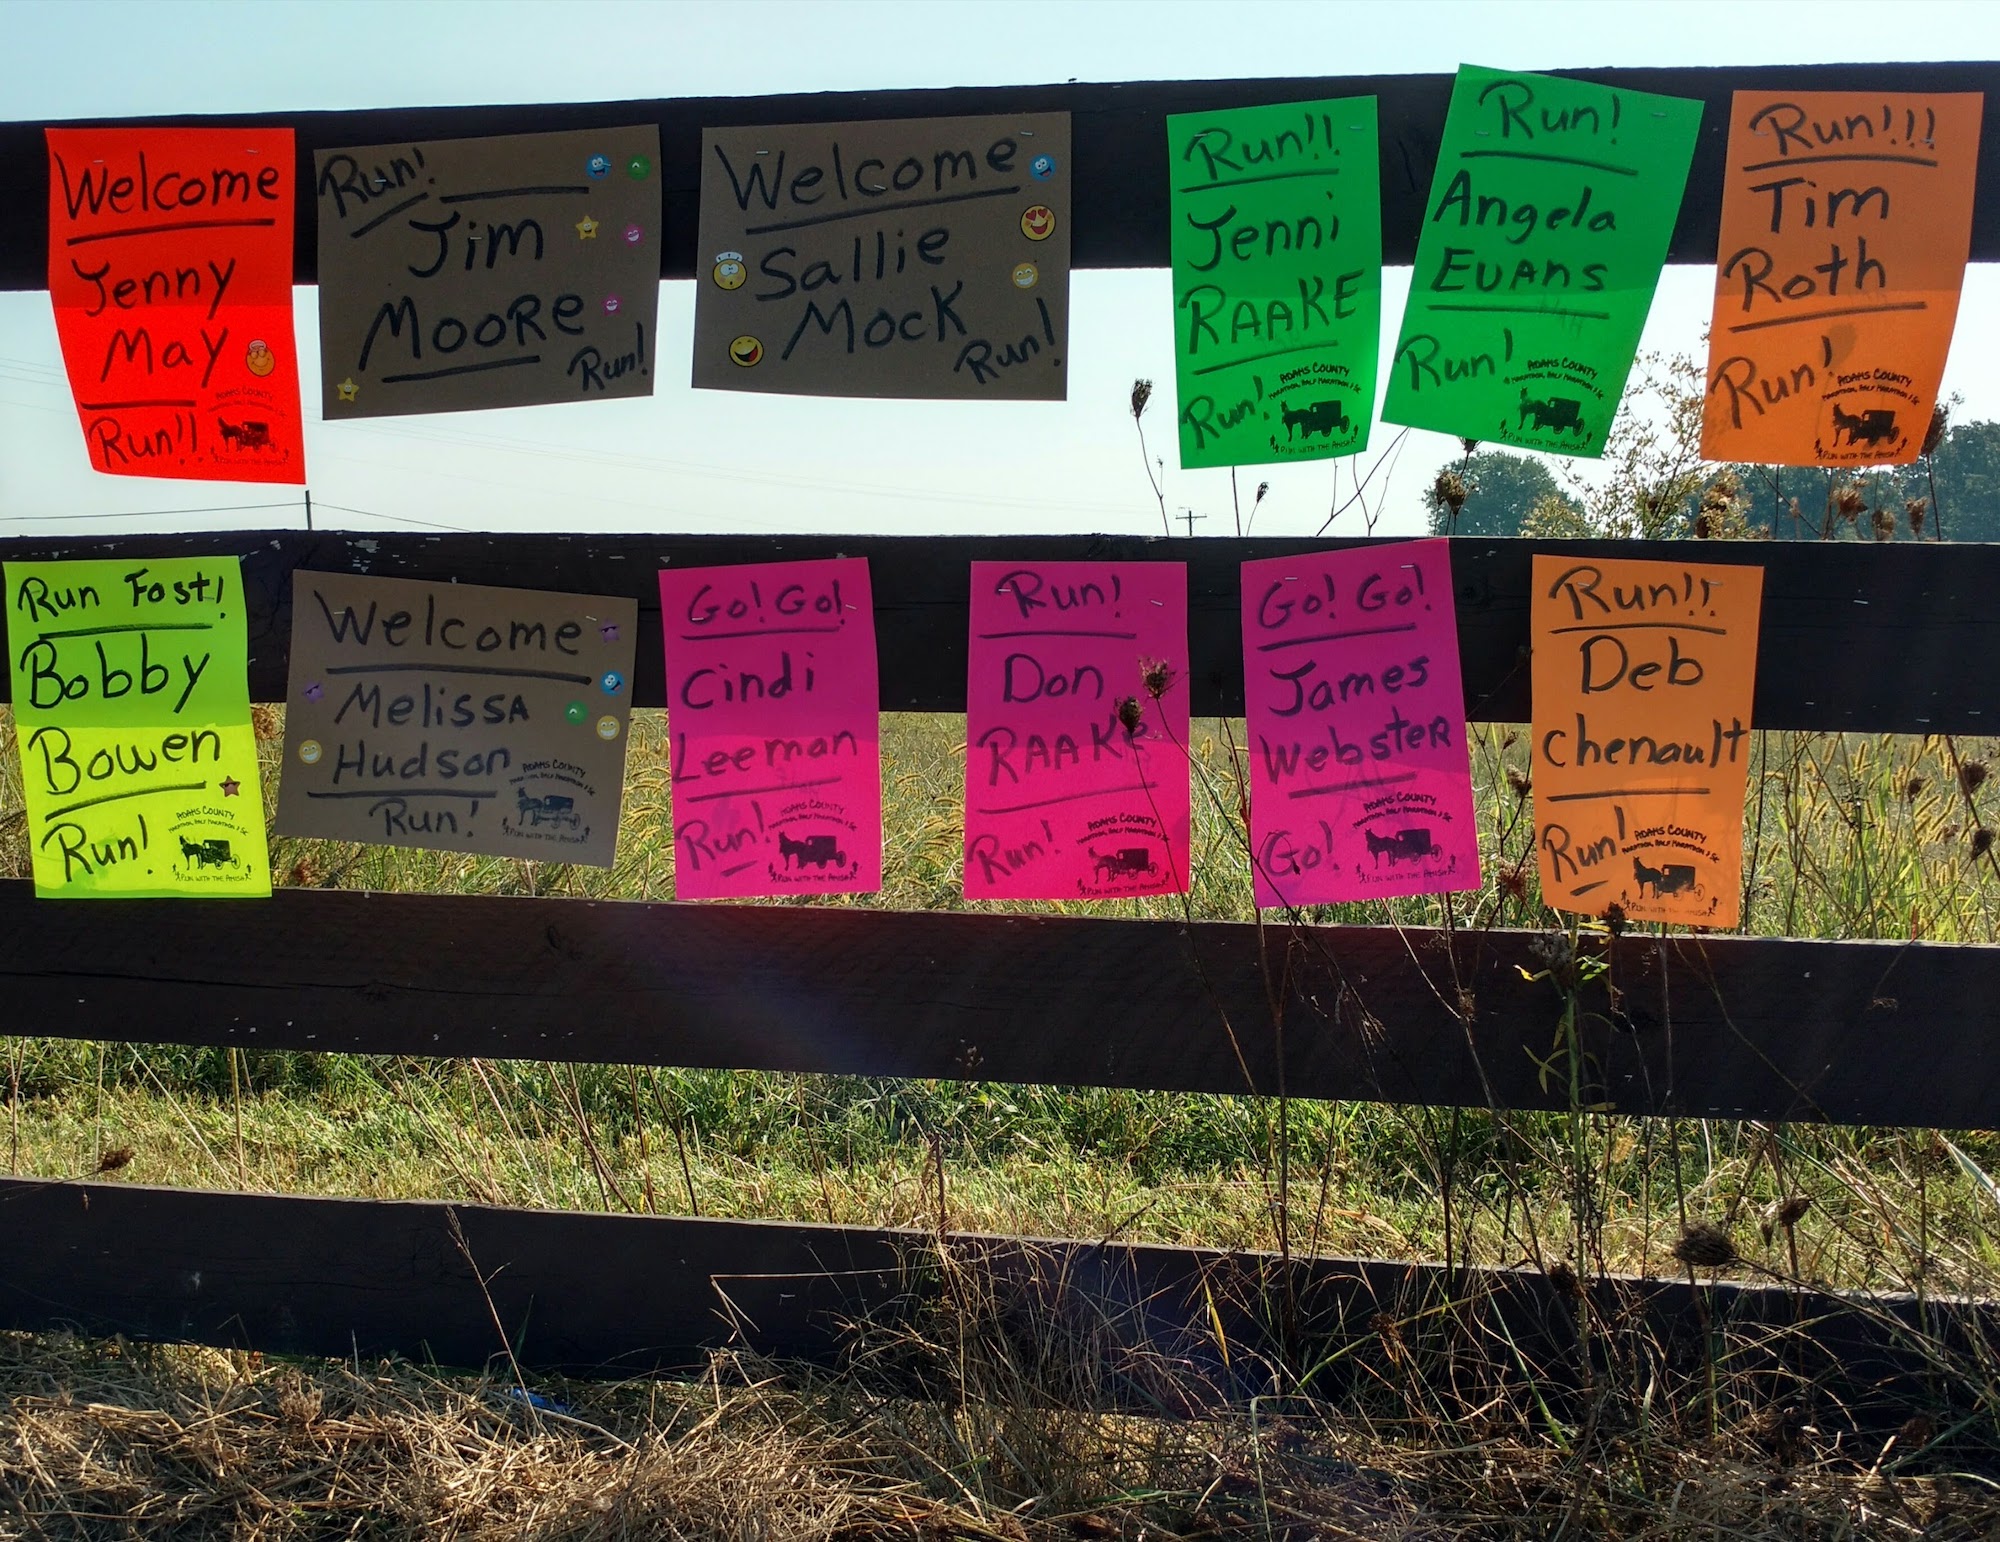 During the Run with the Amish Half Marathon, an endouraging sign was posted for every single athlete.